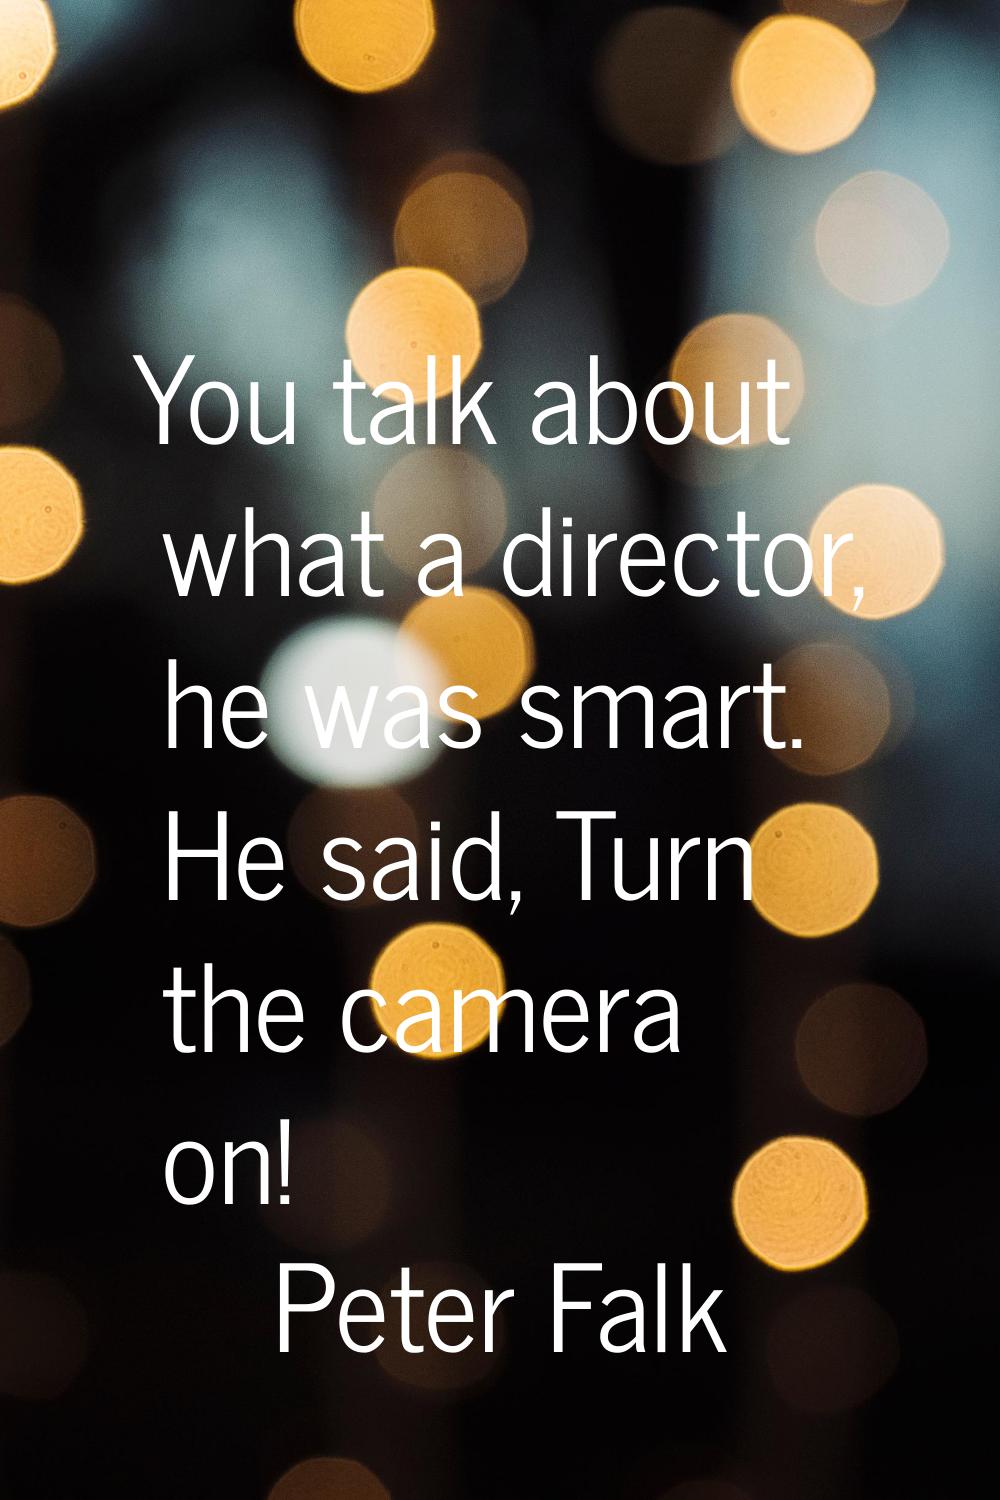 You talk about what a director, he was smart. He said, Turn the camera on!